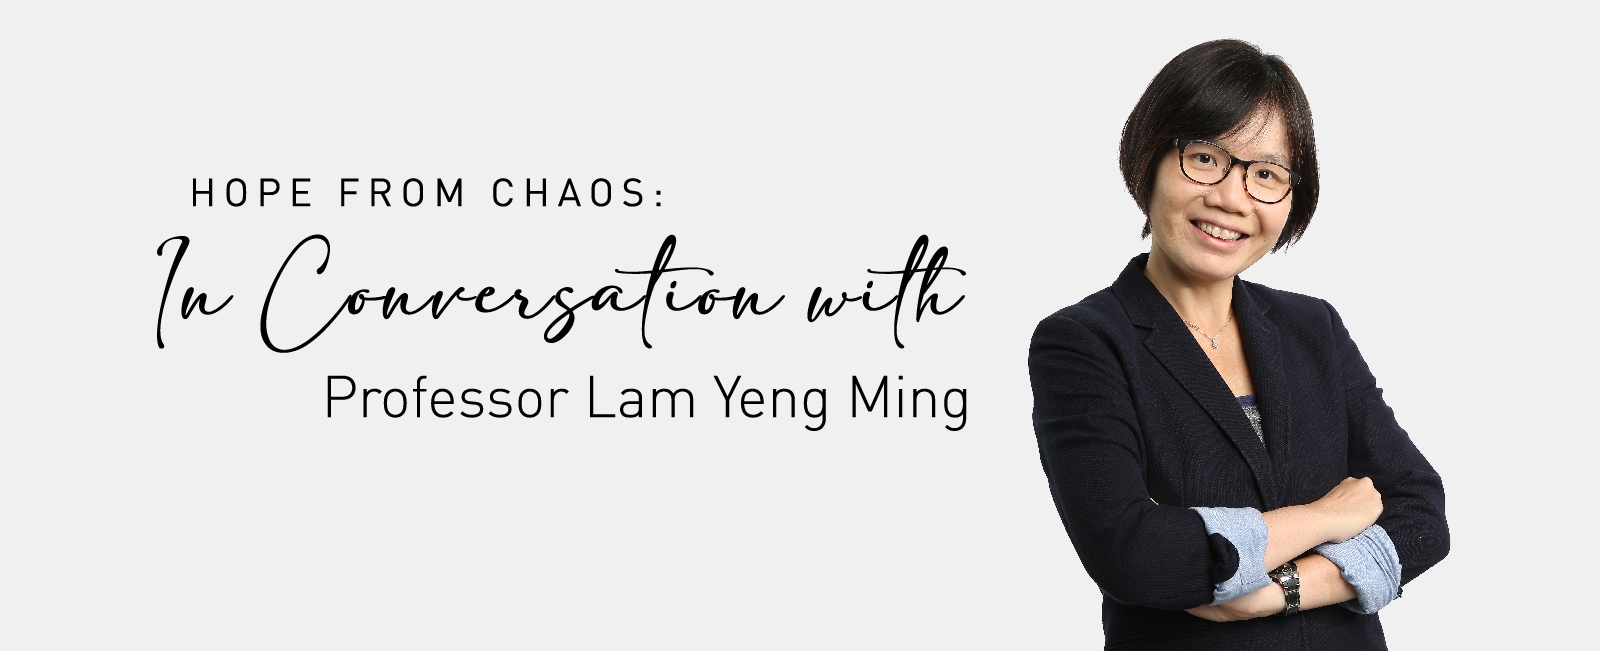 Hope from Chaos: In Conversation with Professor Lam Yeng Ming